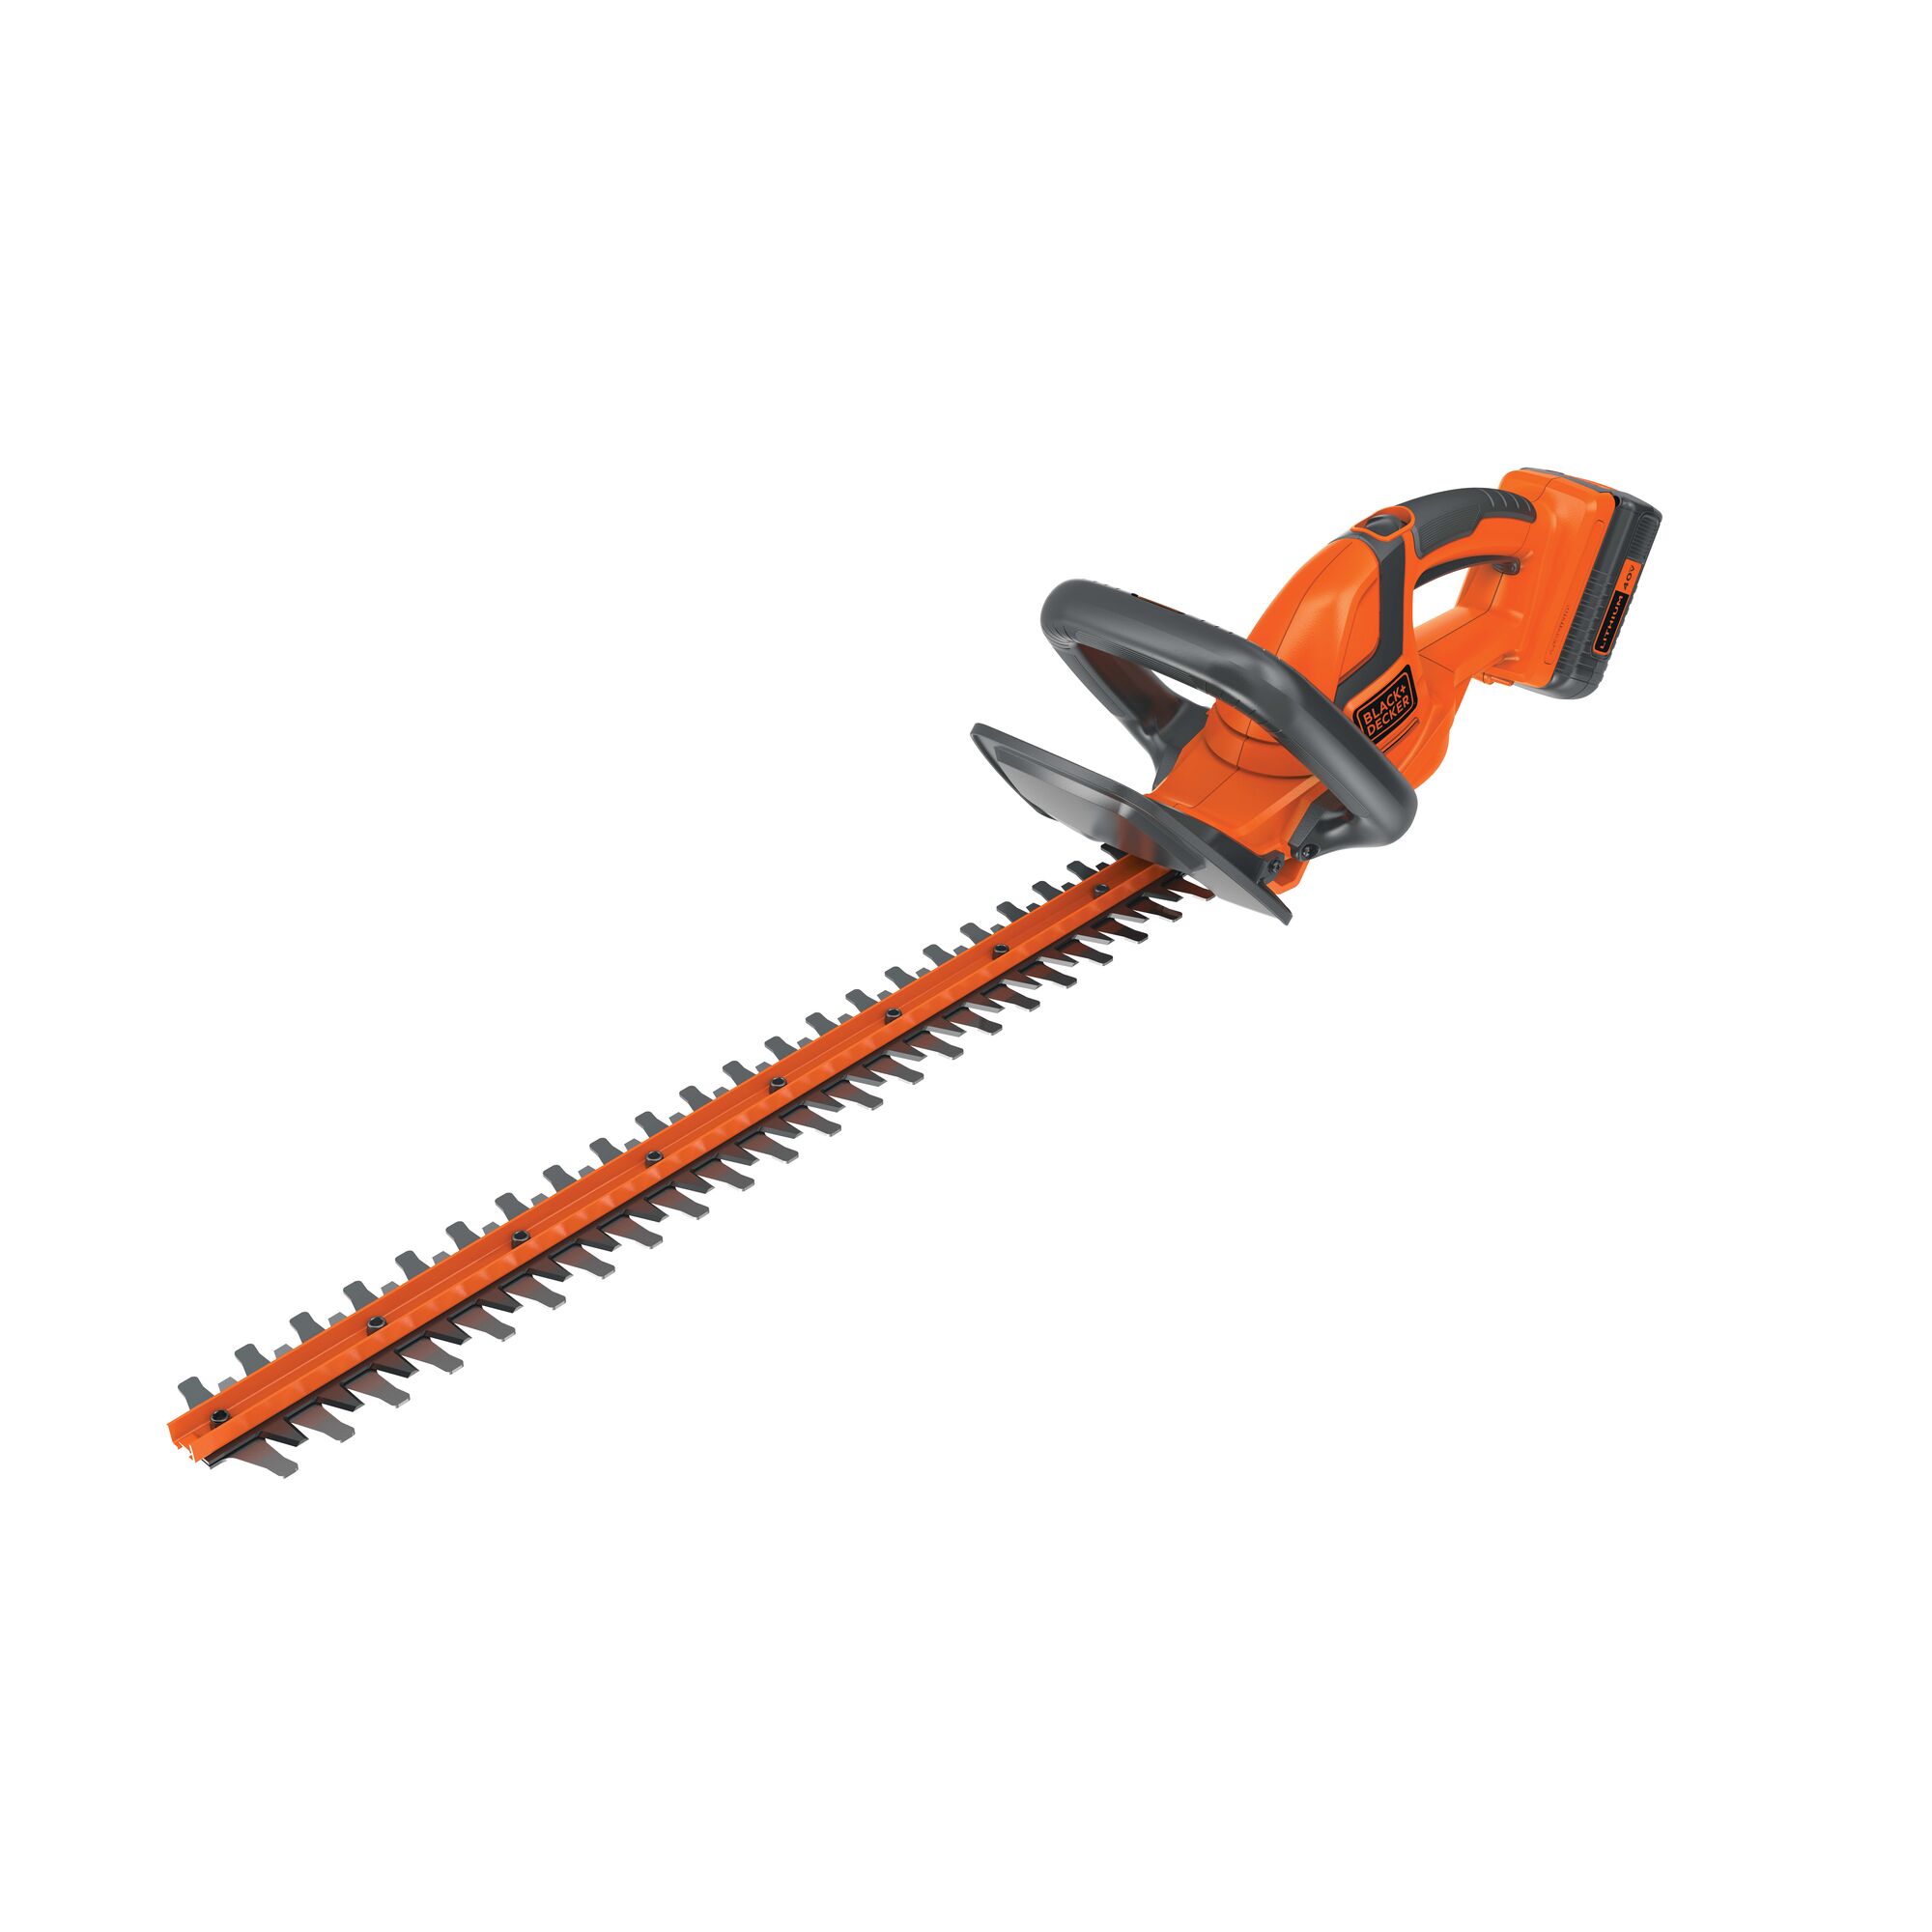 22 Inch 40 Volt Max Hedge Trimmer on white background.